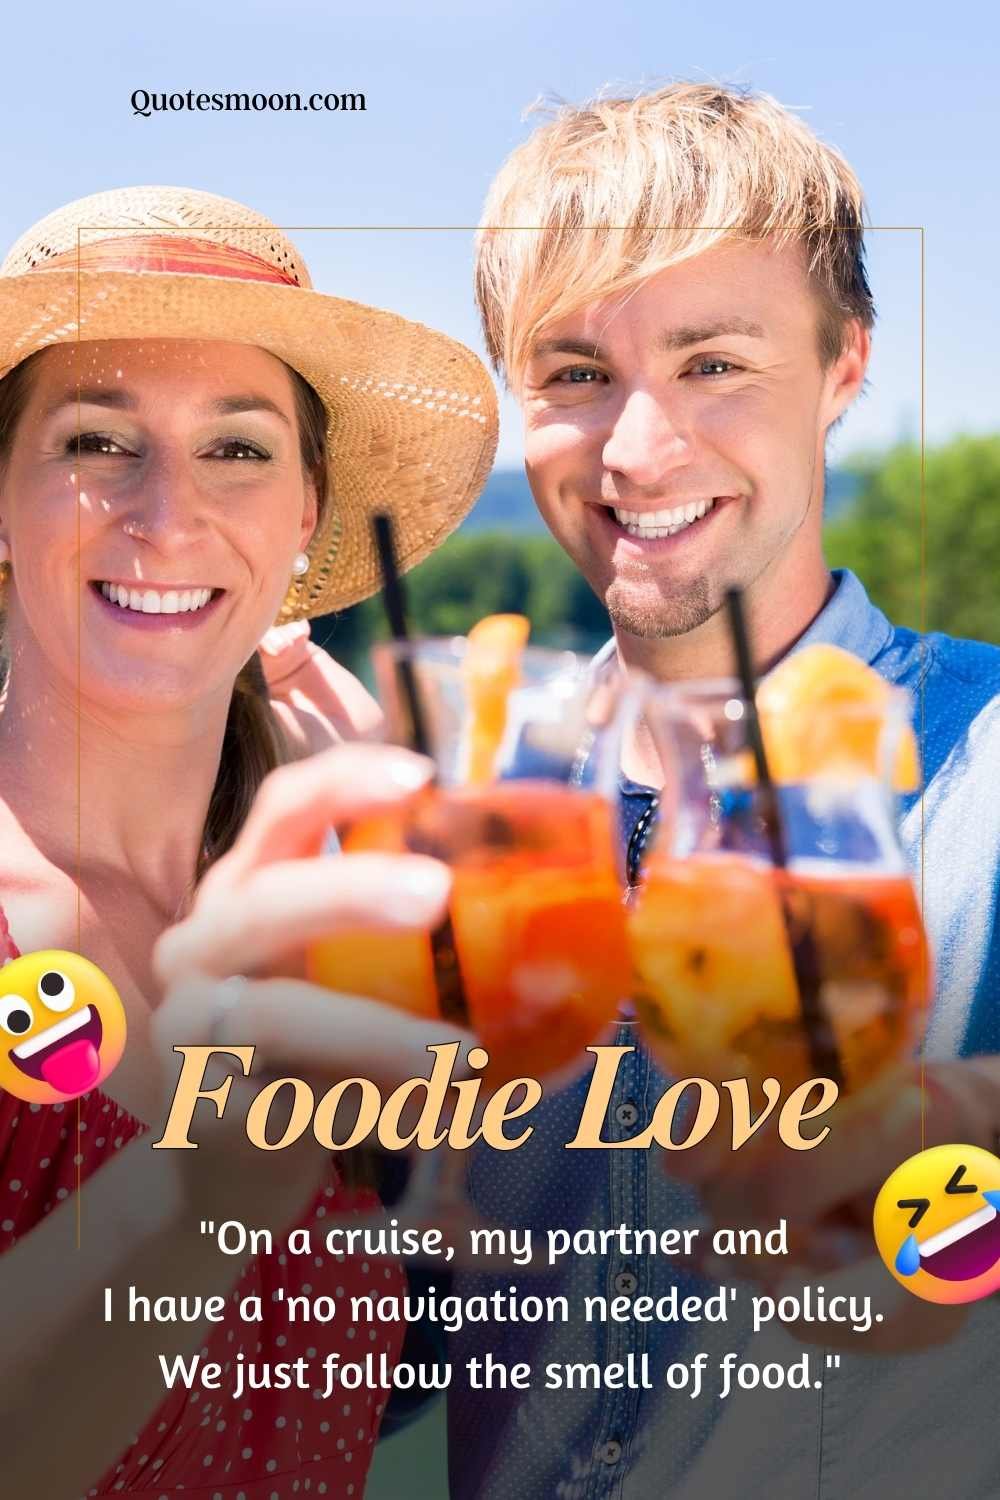 funny couple cruise foodie love quotes with images HD